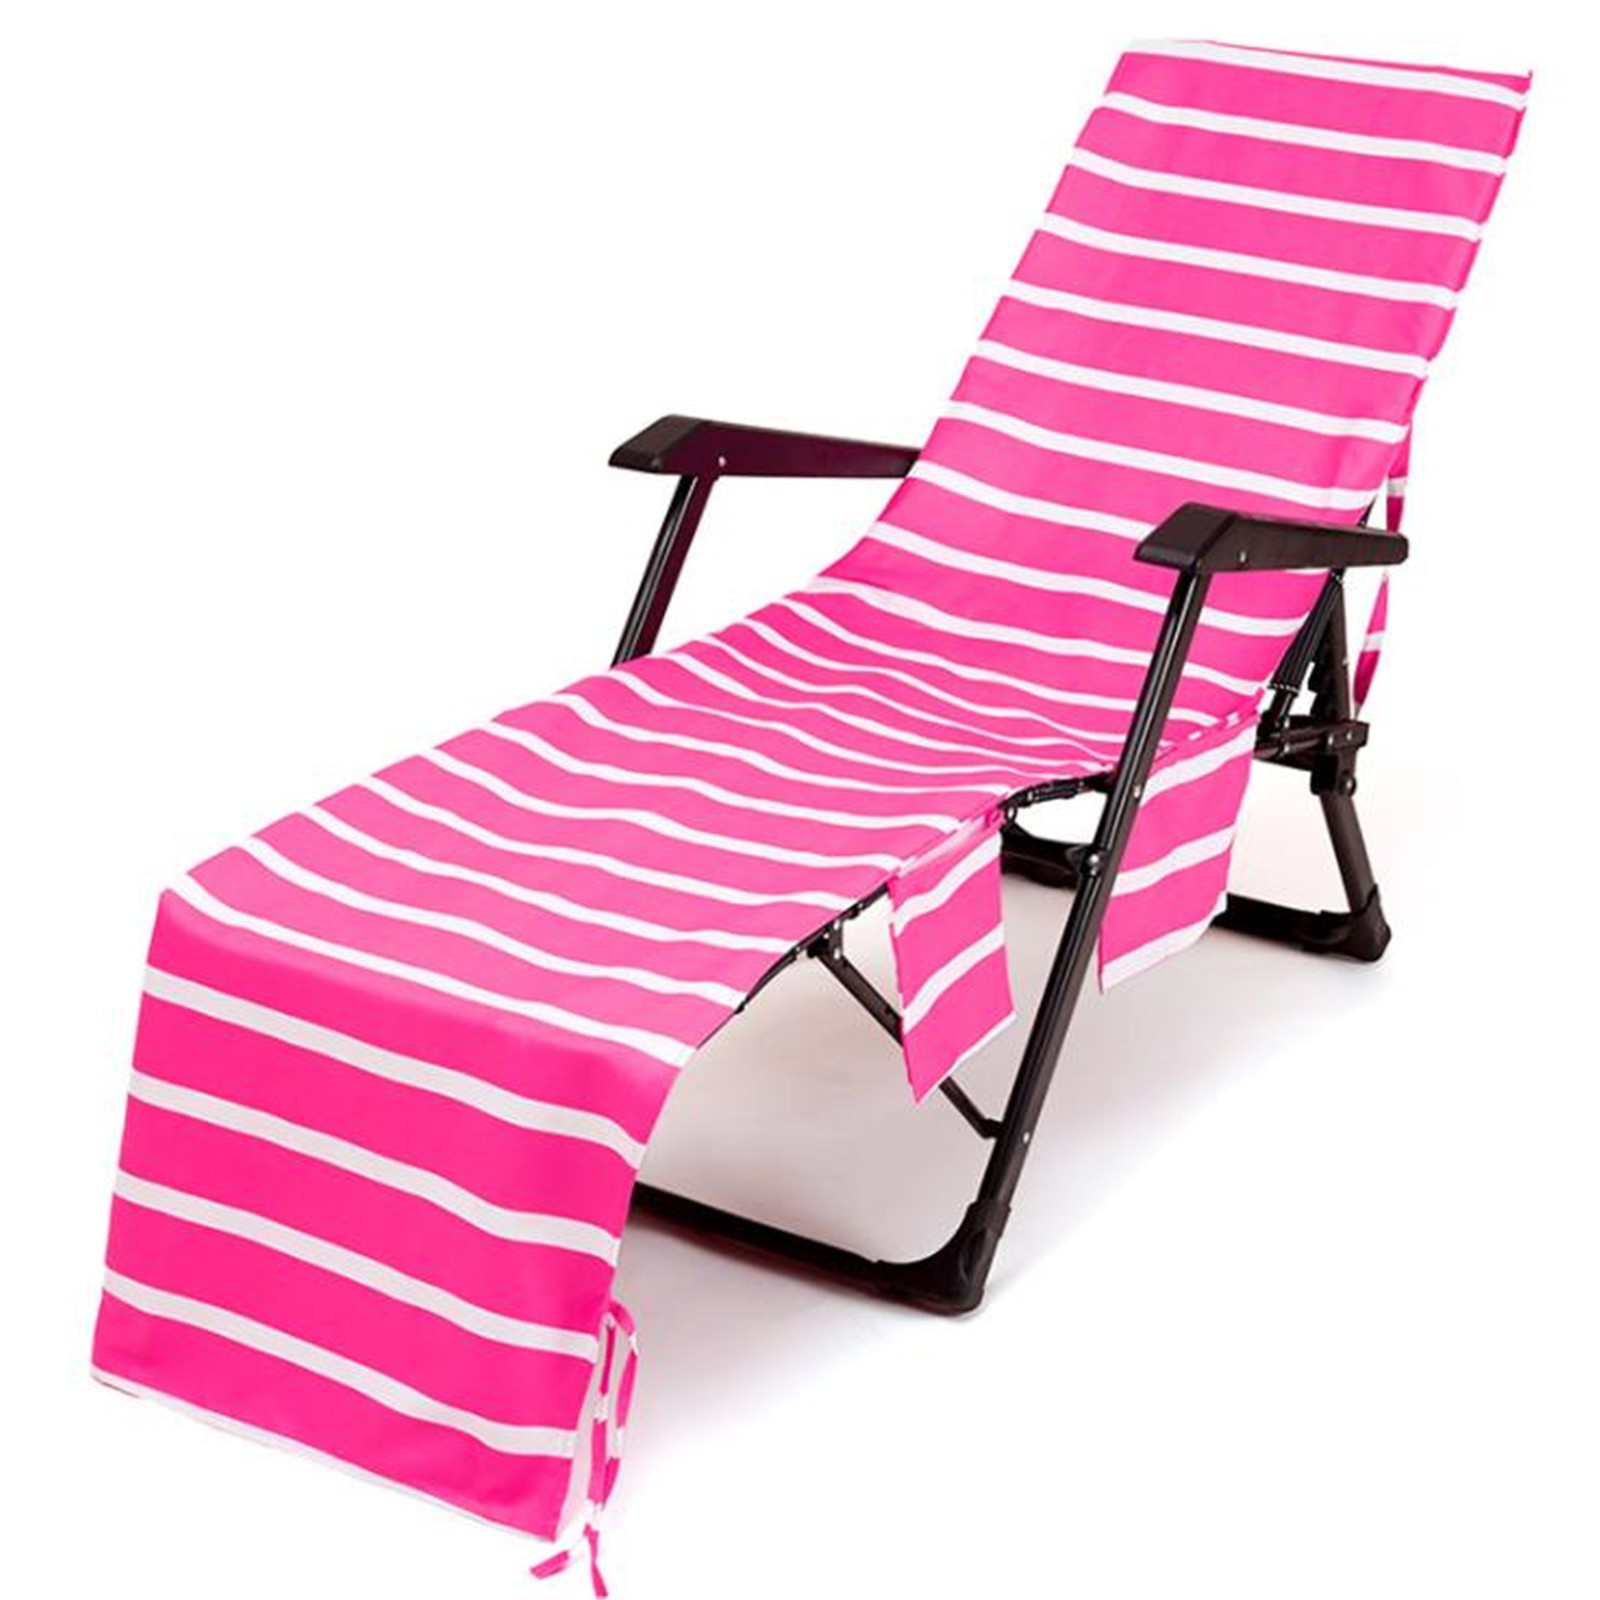 Dezsed Pool Lounge Chair Cover Clearance Stripe Chair Cover Printed Beach Towel Polyester Cotton Lounge Chair Towel Hot - image 2 of 4